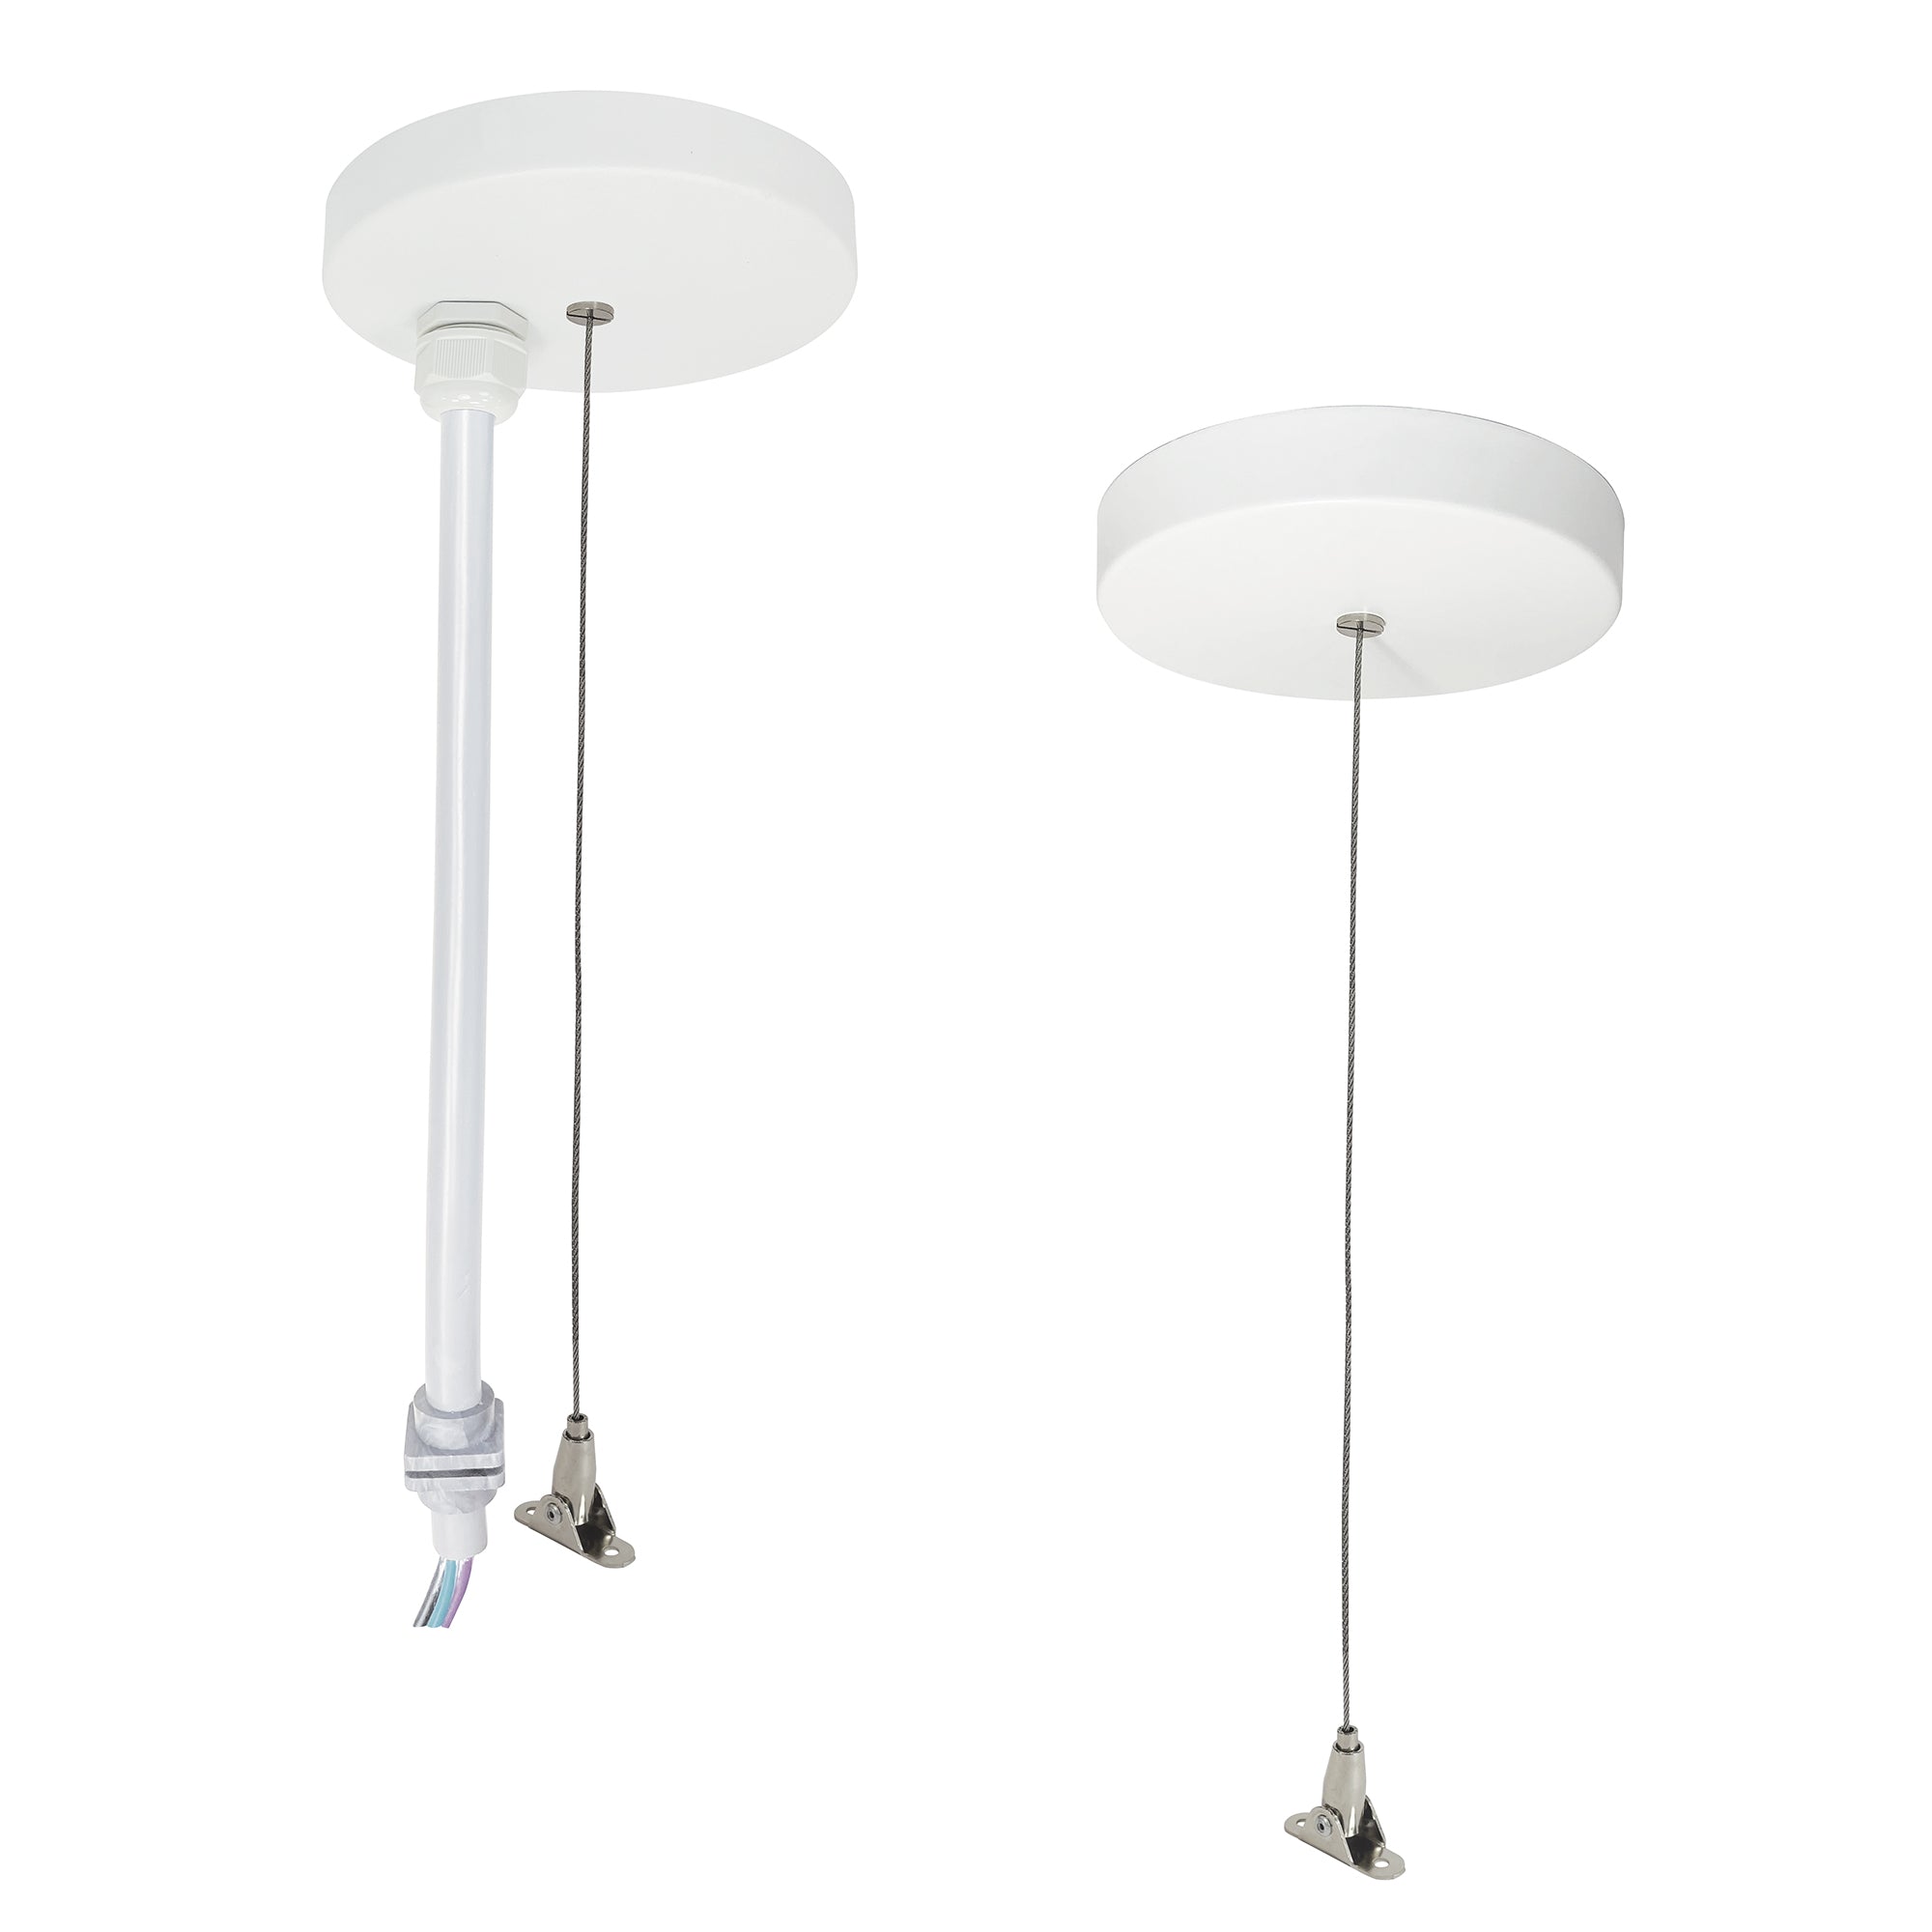 Nora Lighting NLUD-PCCW/20 - Linear - 20' Pendant Power & Aircraft Mounting Kit for NLUD Series, White Finish